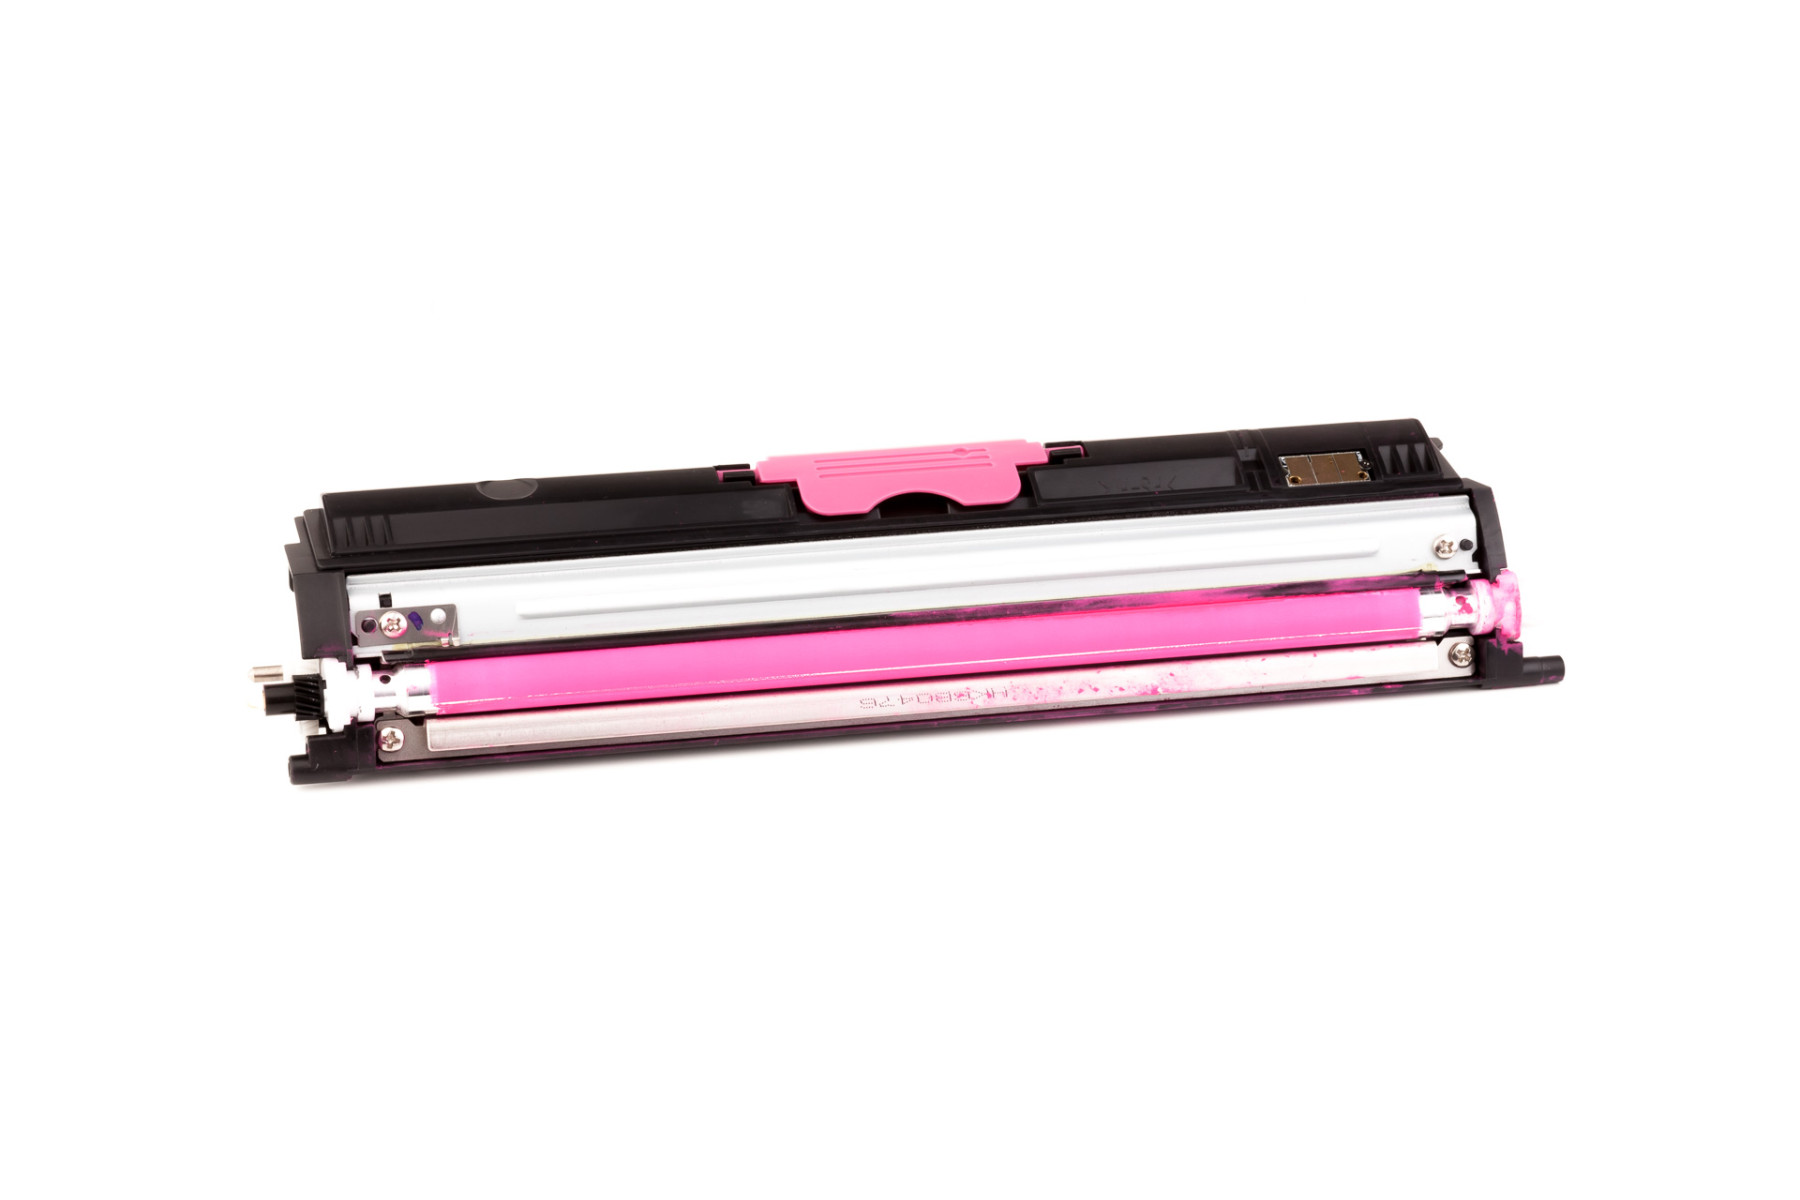 Set consisting of Toner cartridge (alternative) compatible with Xerox Phaser 6121 black, cyan, magenta, yellow - Save 6%